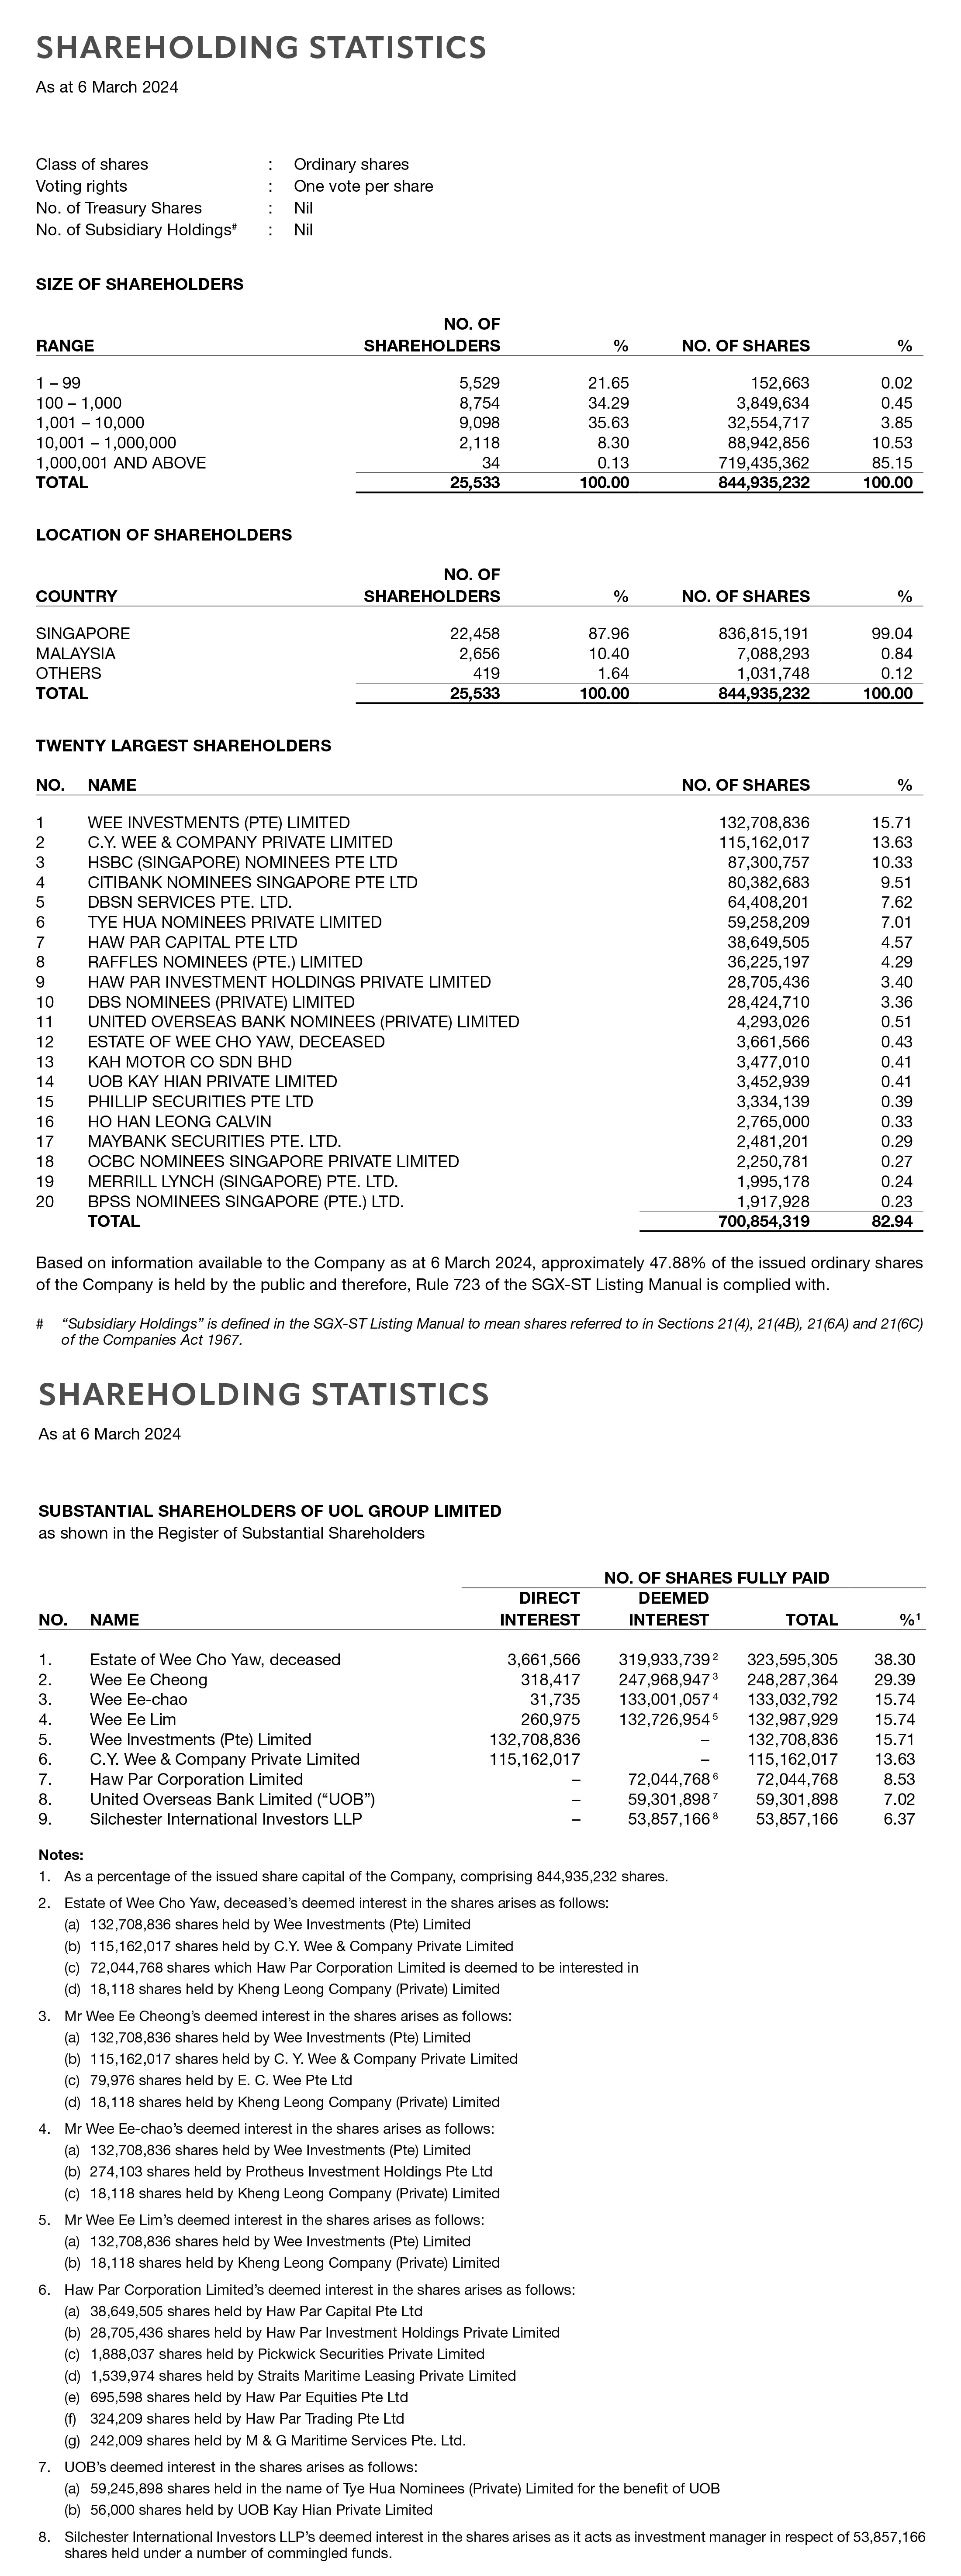 SHAREHOLDING STATISTICS As at 6 March 2024